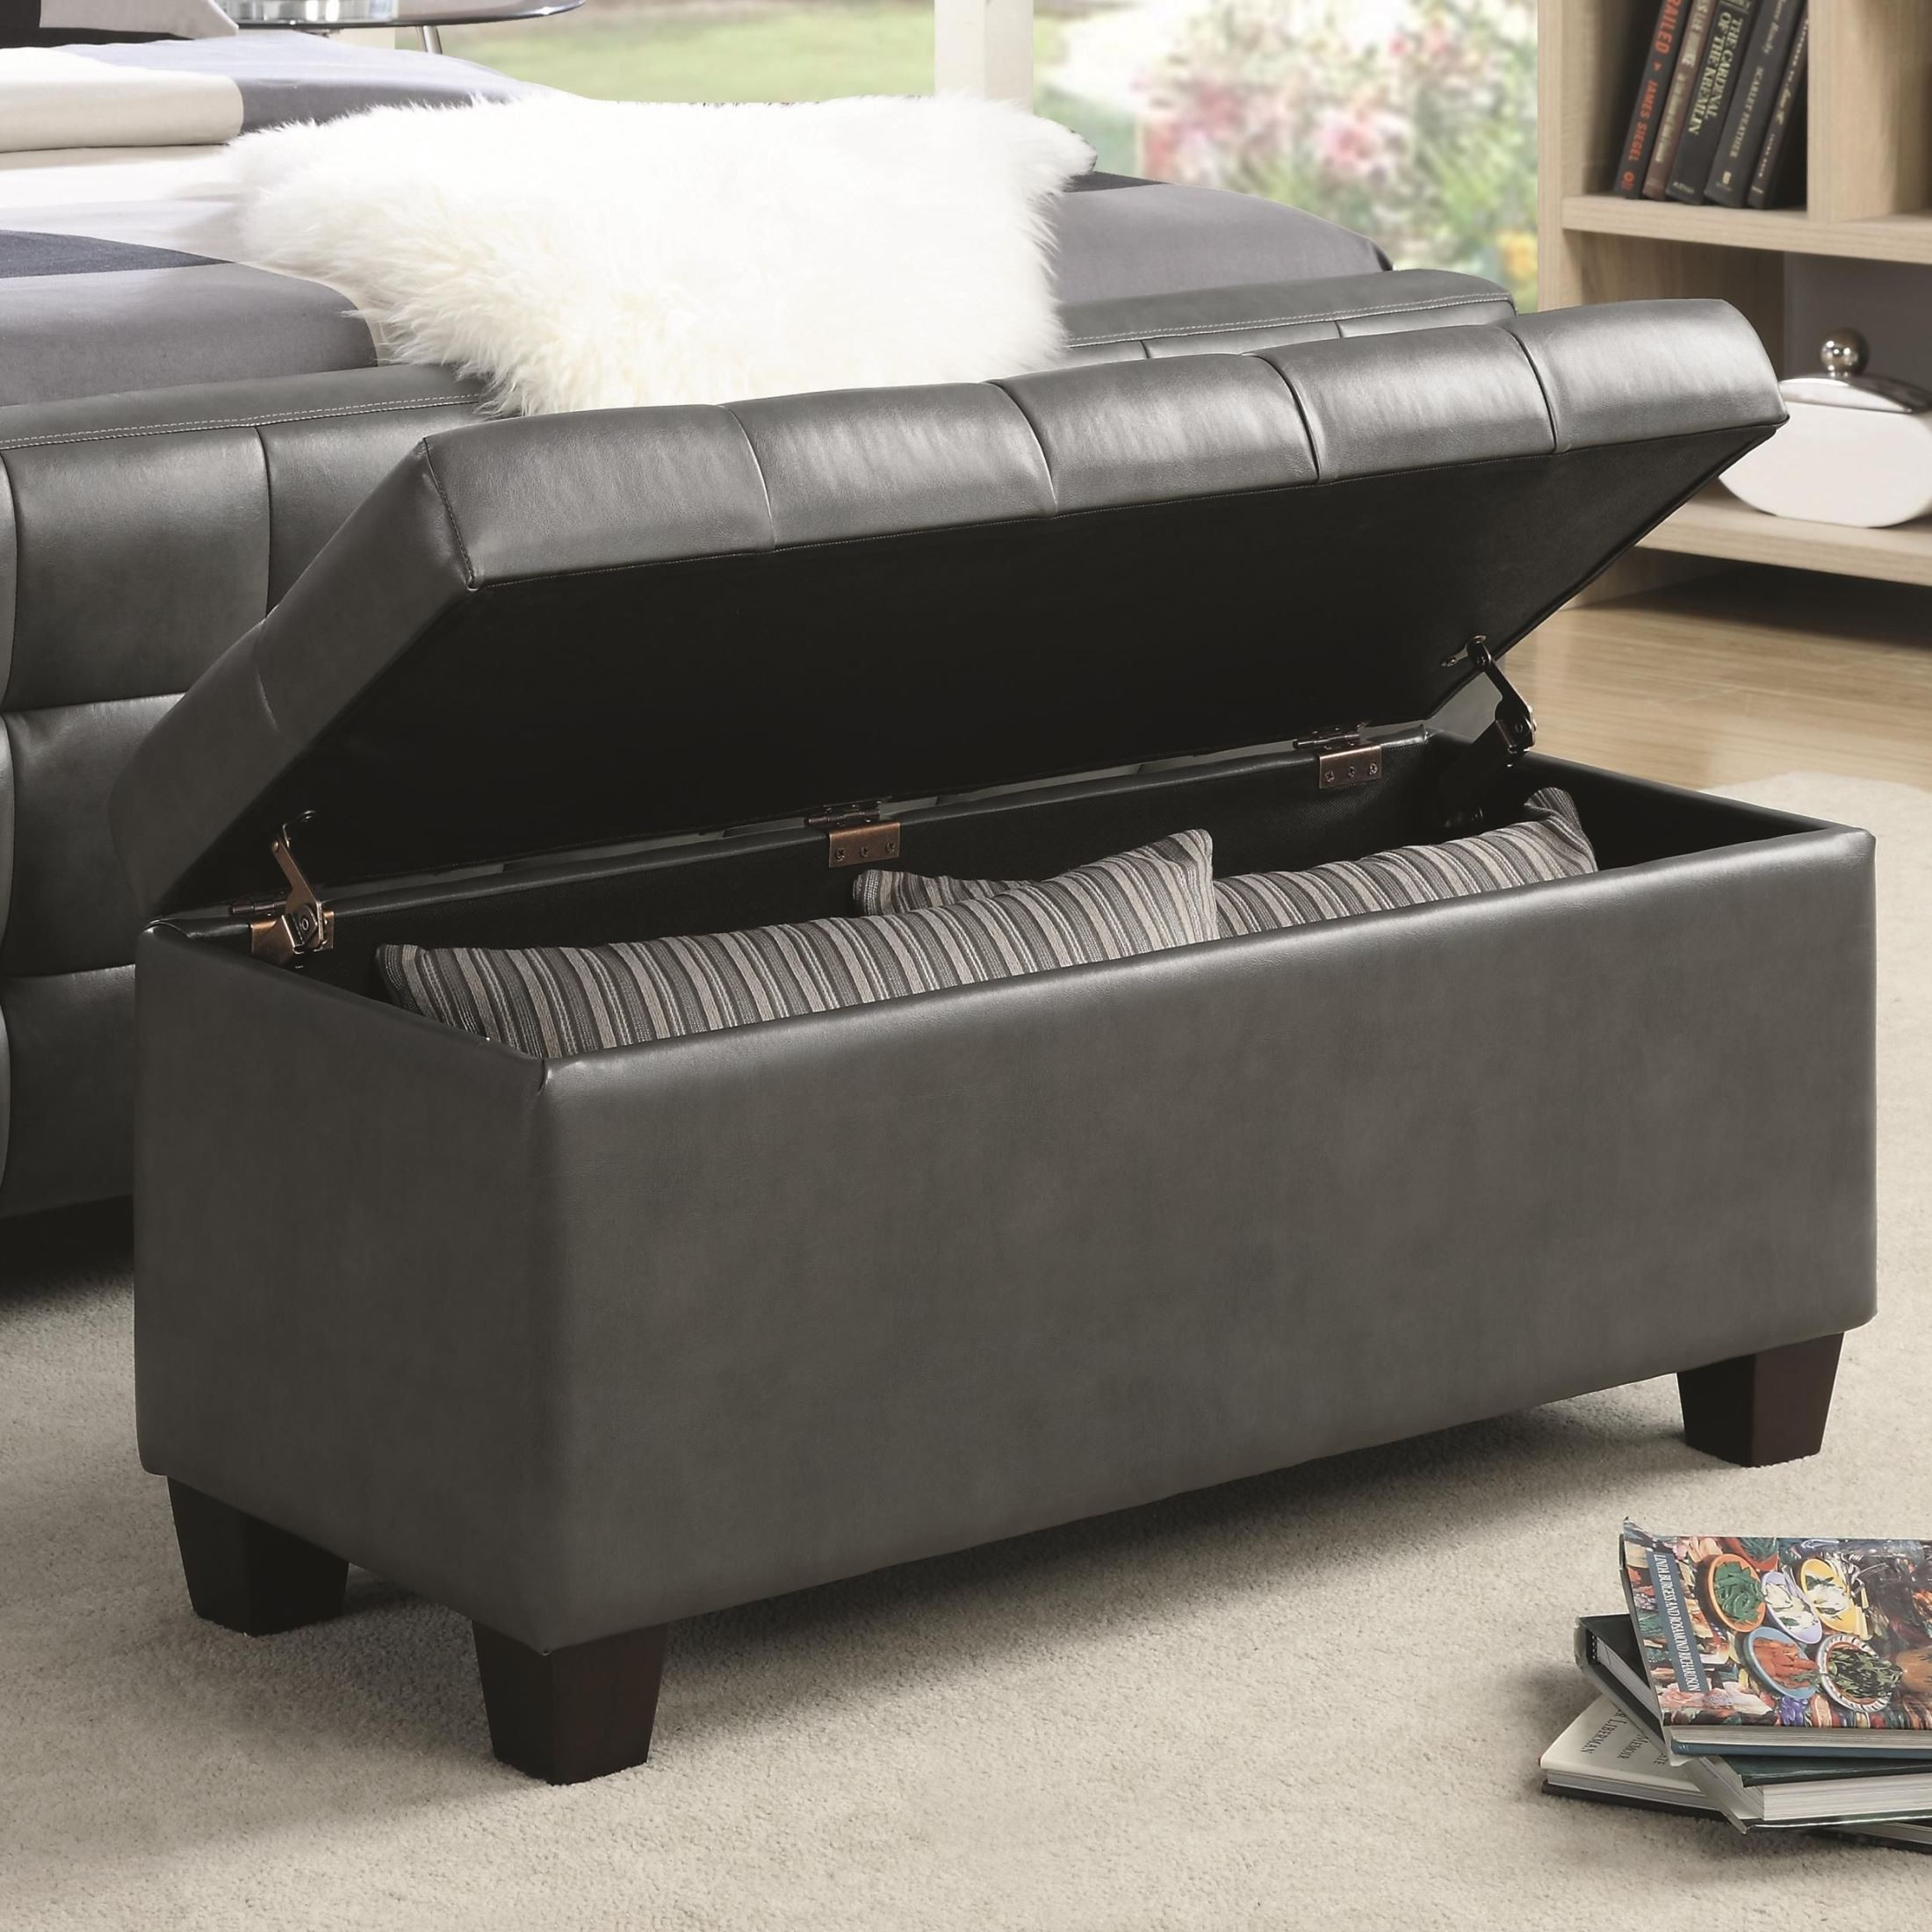 Leather Bench With Storage
 Gray Faux Leather Rectangular Storage Bench from